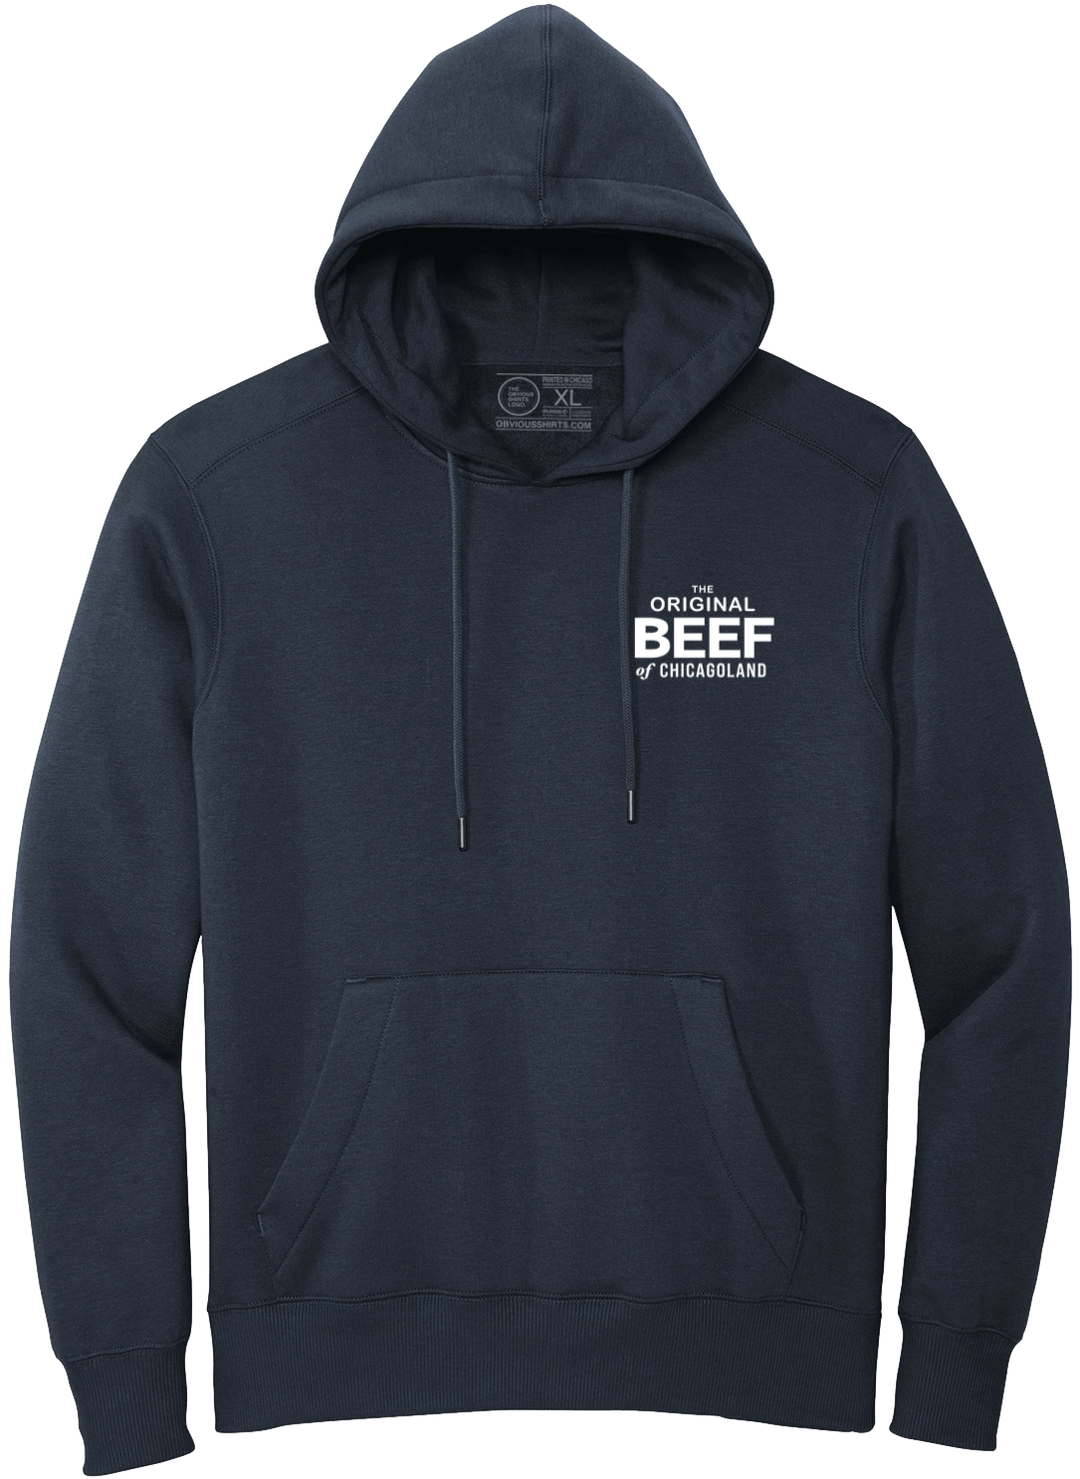 THE ORIGINAL BEEF OF CHICAGOLAND. (HOODED SWEATSHIRT) - OBVIOUS SHIRTS